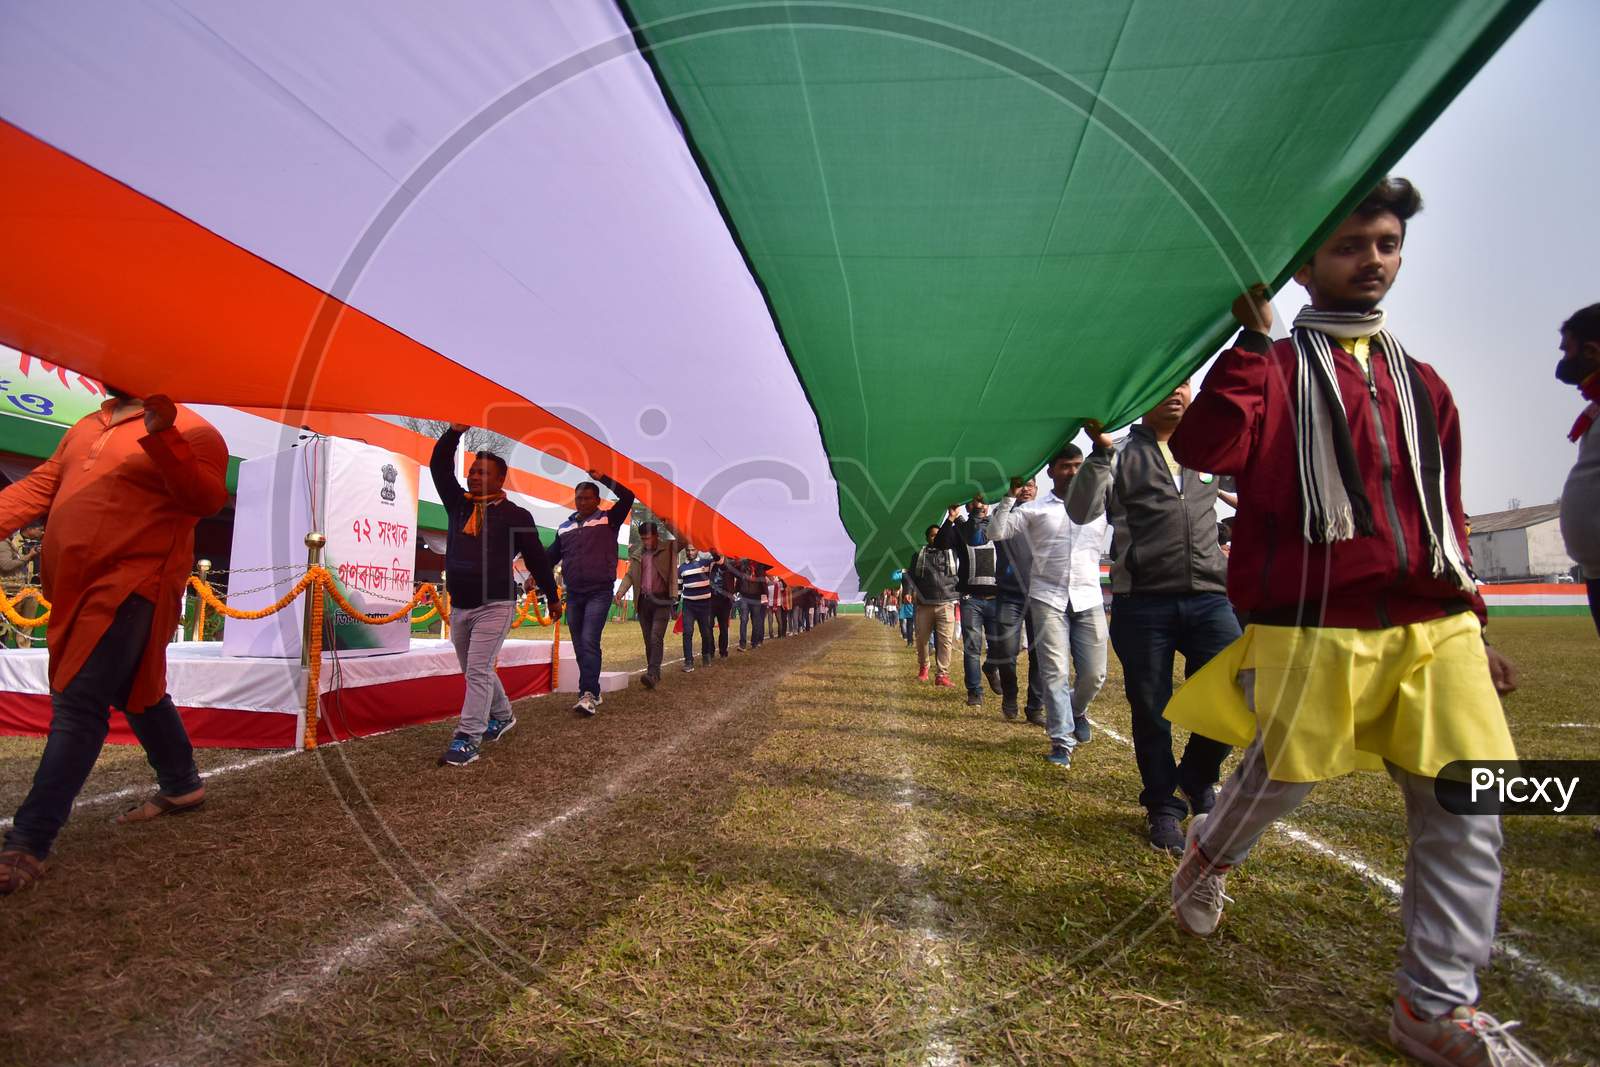 Youth  carry a 100ft long Tricolour  on the occasion of 72nd Republic Day at Nurul Amin stadium parade ground in  Assam on Jan 26,2021